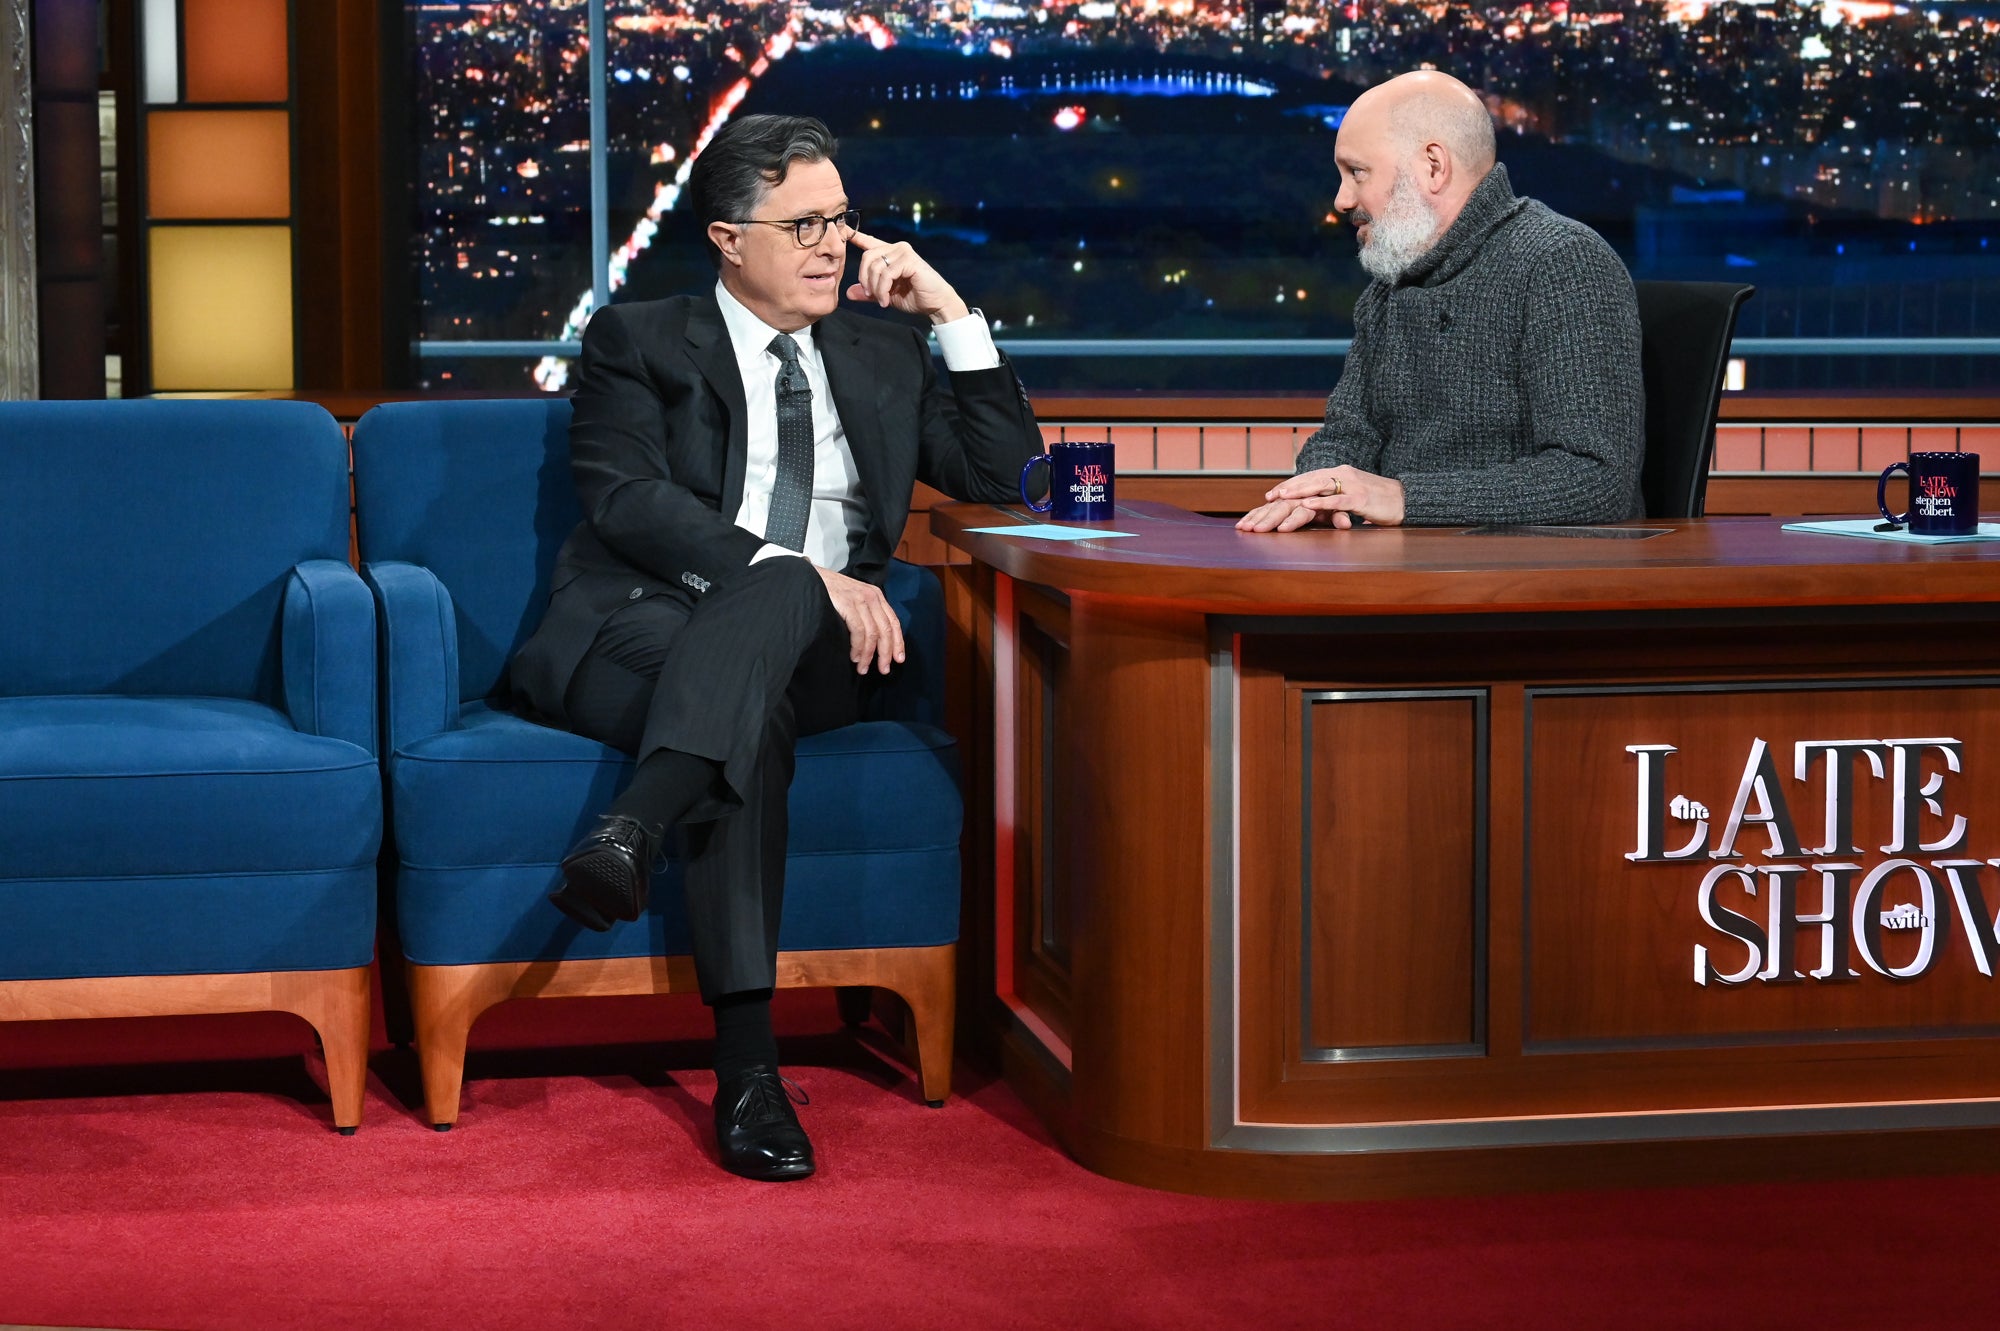 Me on The Late Show with Stephen Colbert (Jan 20, 2022)